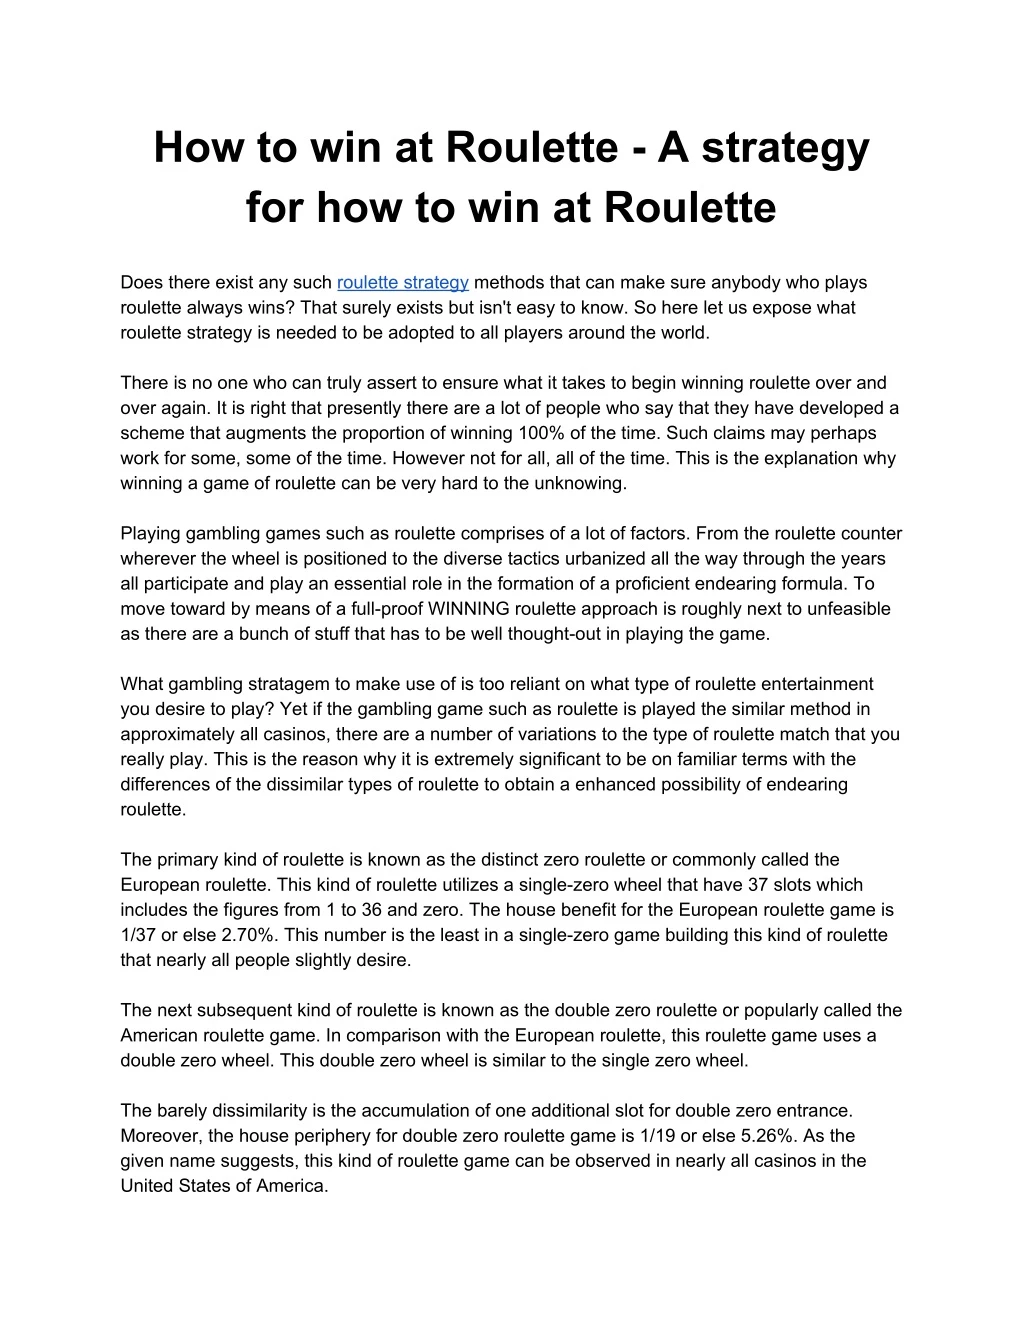 how to win at roulette a strategy